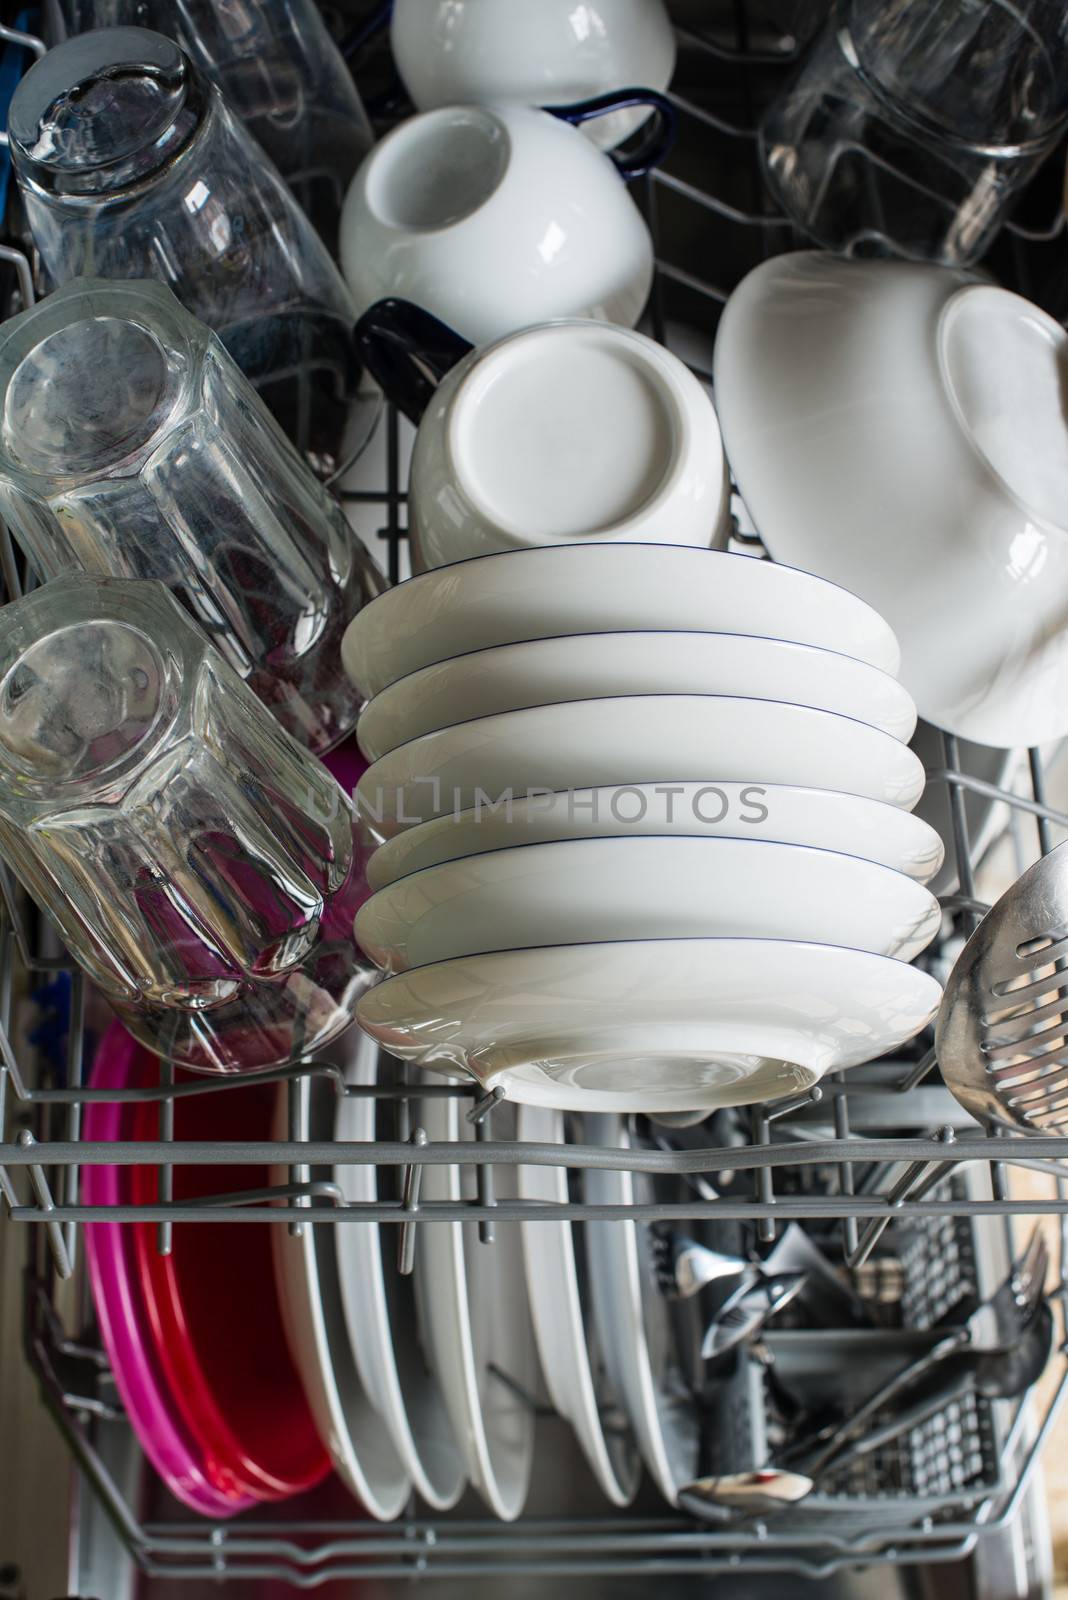 Dishwasher after cleaning process with plates, cups, glasses, cutlery and plastic boxes